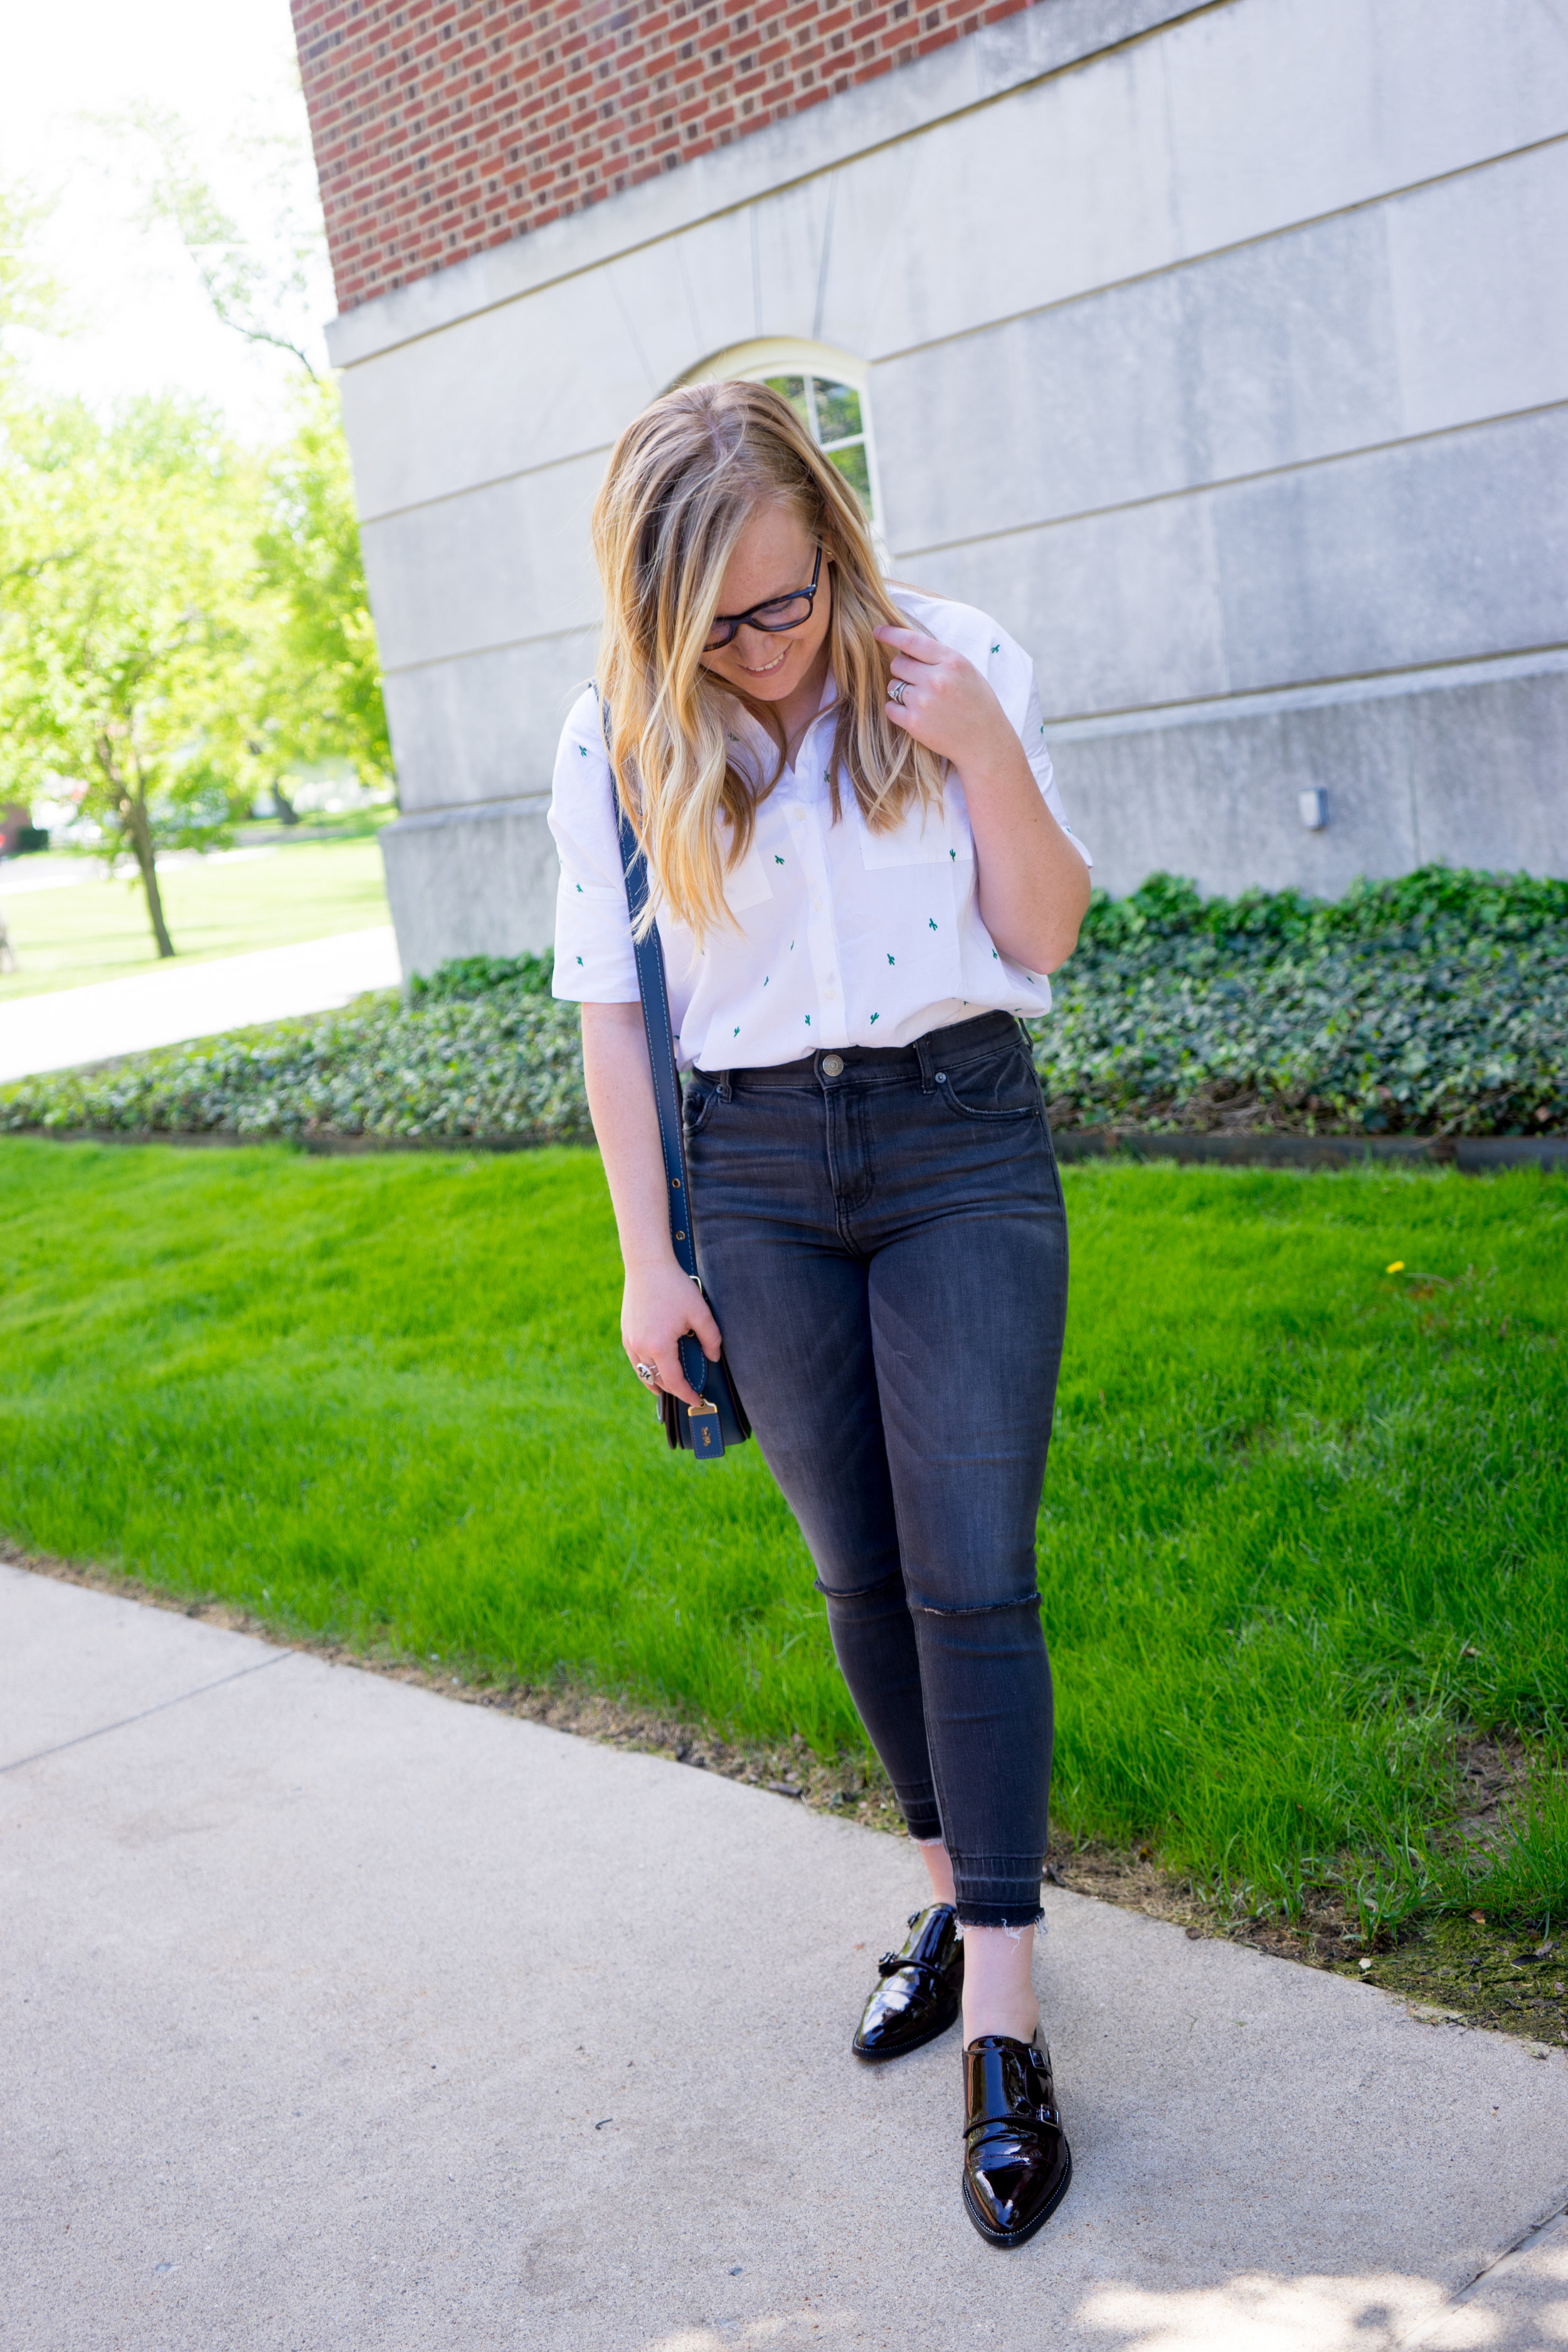 Maggie a la Mode - Madewell Cactus Embroidered Courier Shirt, Aquatalia Harlow Monk Strap Loafers, Coach Saddle 23 Saddlebag, Express Distressed High Waisted Release Hem Ankle Jean Legging